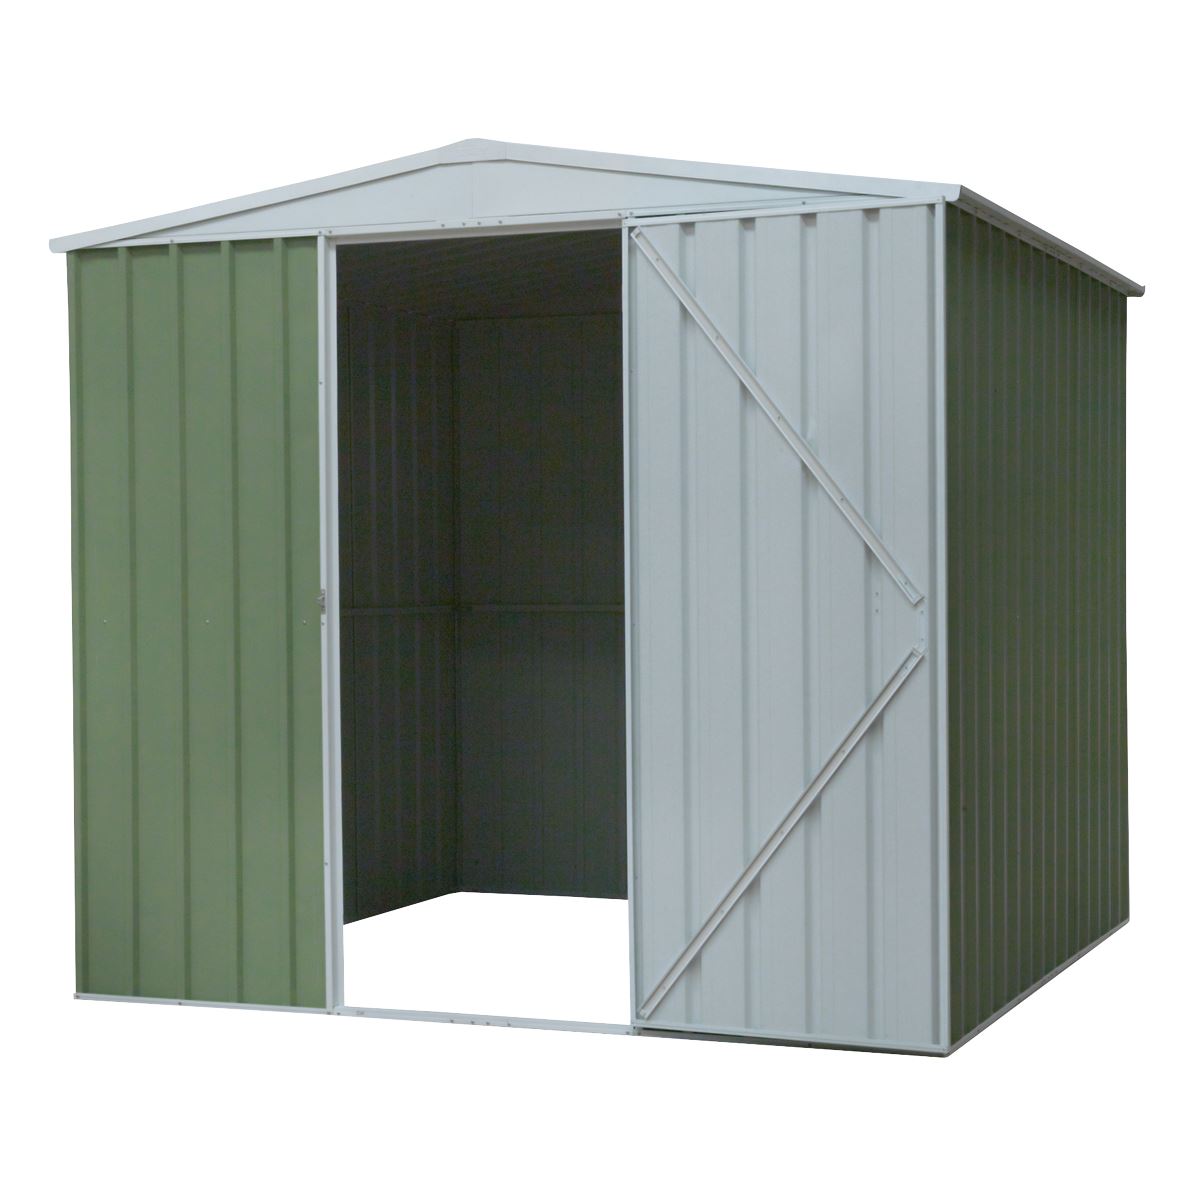 Dellonda Galvanised Steel Metal Garden/Outdoor/Storage Shed, 7.5FT x 7.5FT, Apex Style Roof - Green